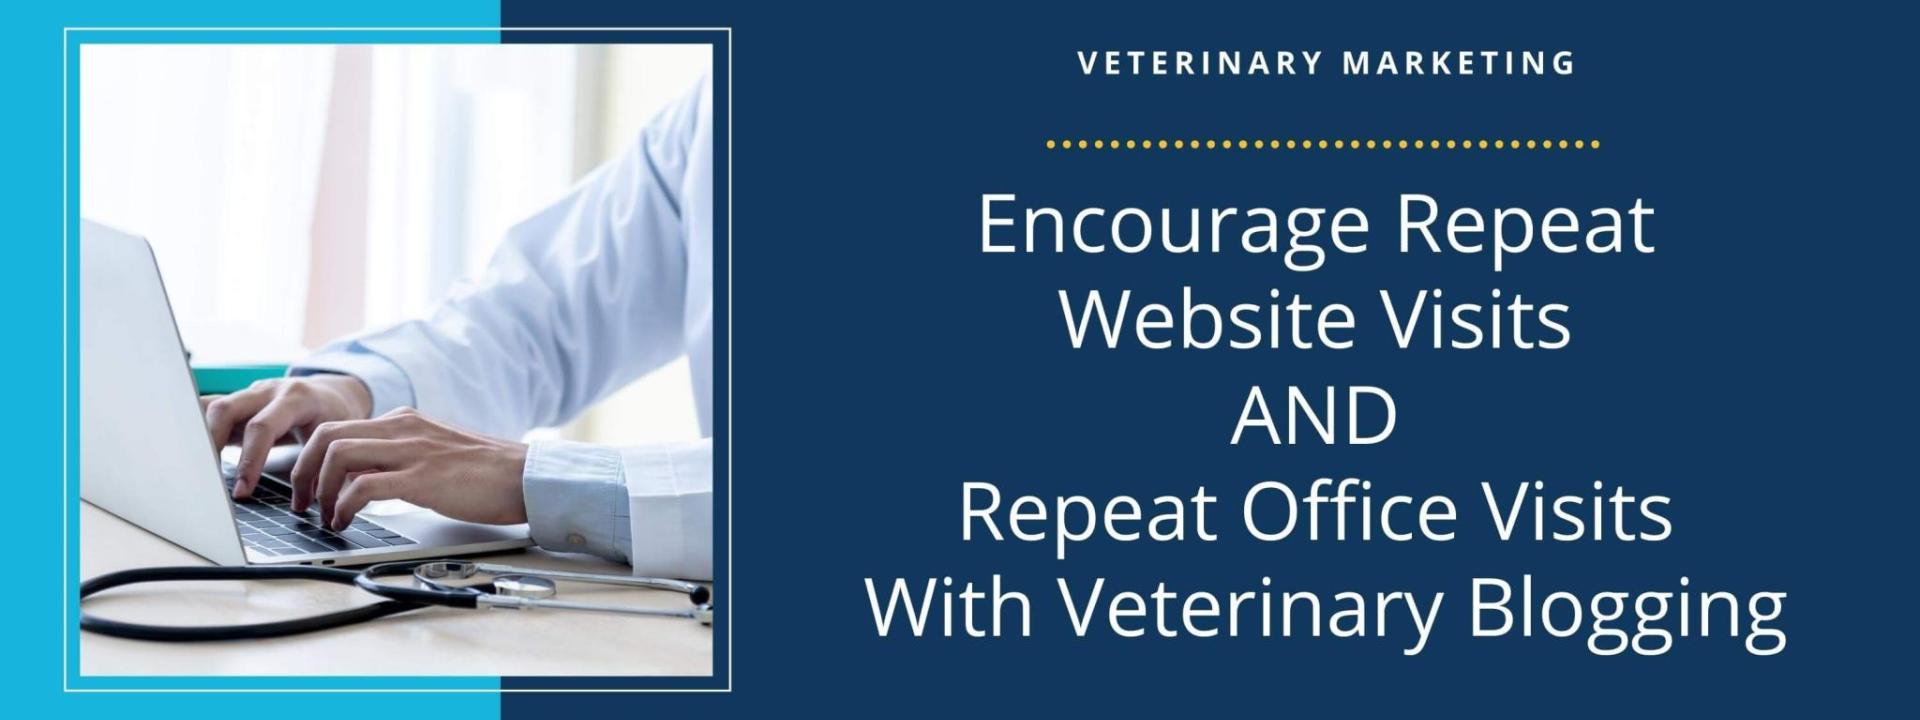 Encourage Repeat Website Visits AND Repeat Office Visits With Veterinary Blogging